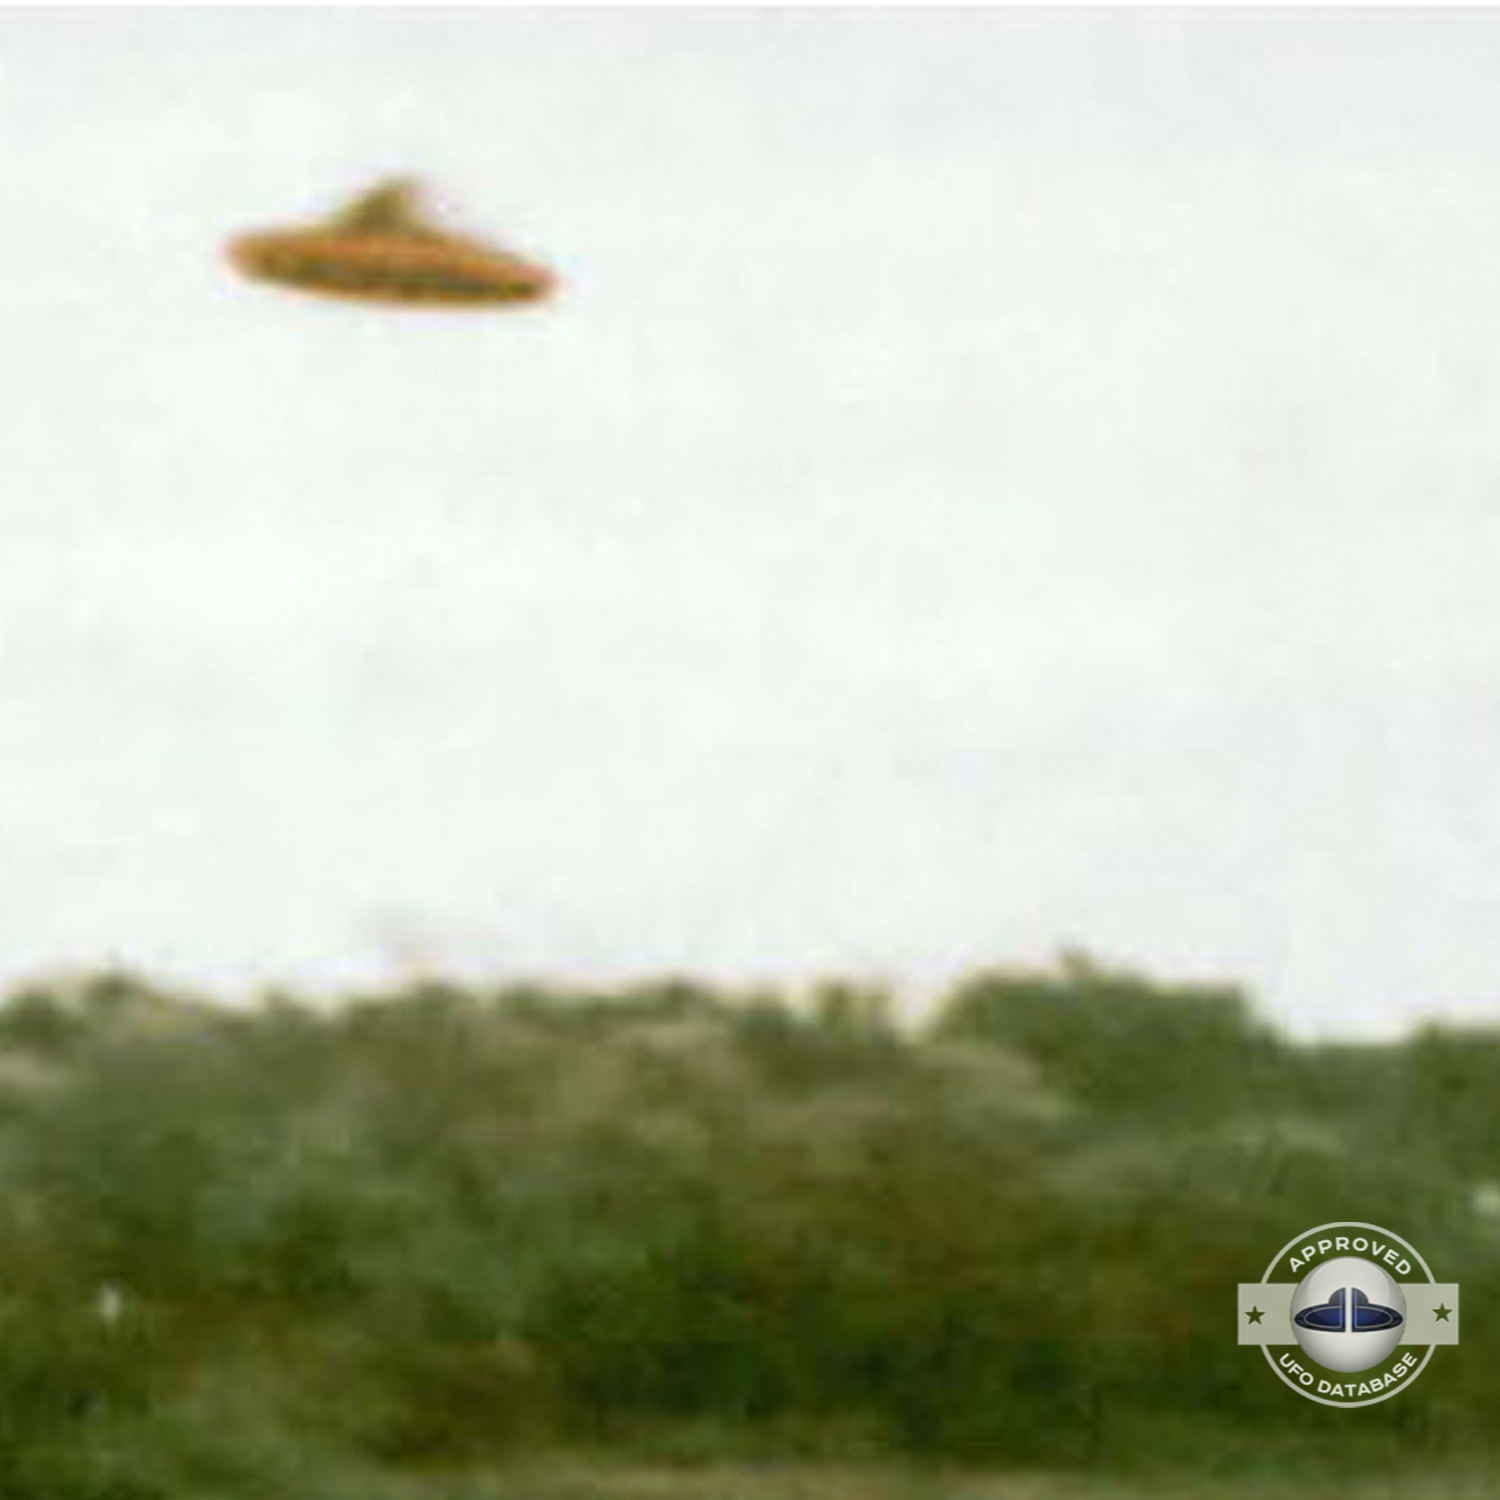 ufo picture was taken from a car ufo was few hundreds meters away UFO Picture #62-3